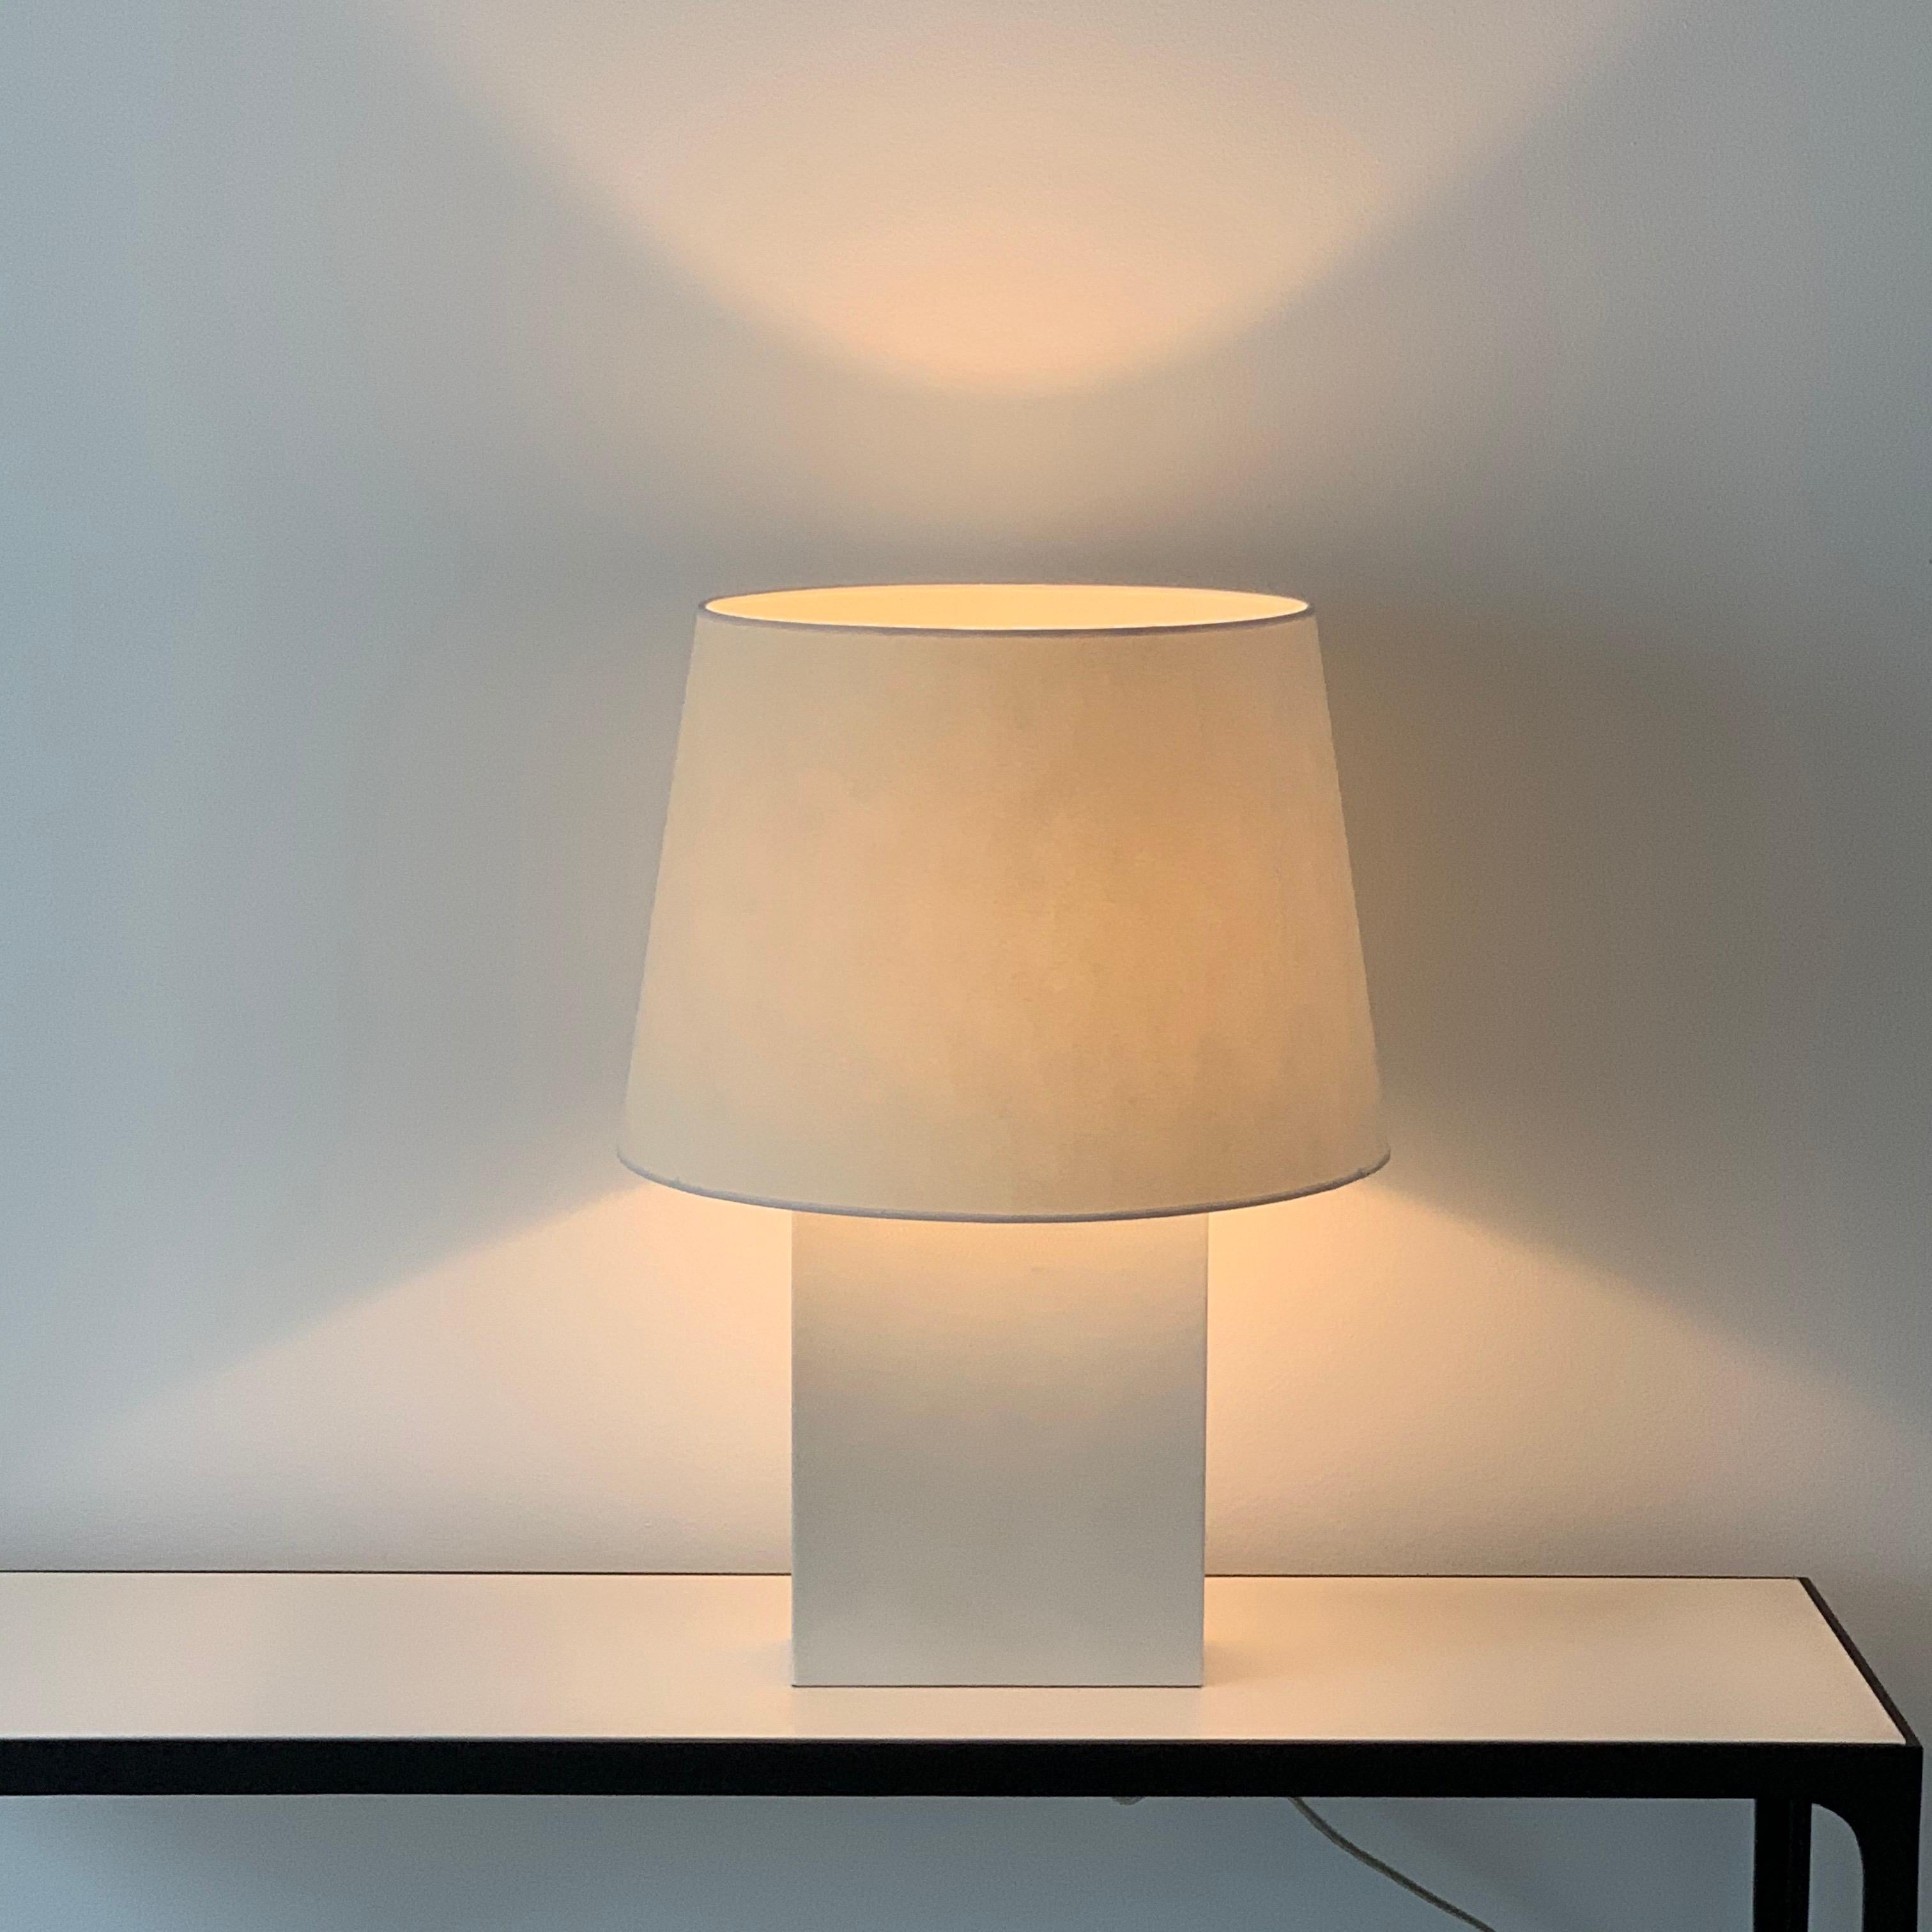 Large 'Bloc' parchment table lamp by Design Frères.

Attractive European style shade mount with no apparent harp / final. Comes with the matching custom parchment paper shade shown.

Handmade with real goatskin parchment and wired with UL listed